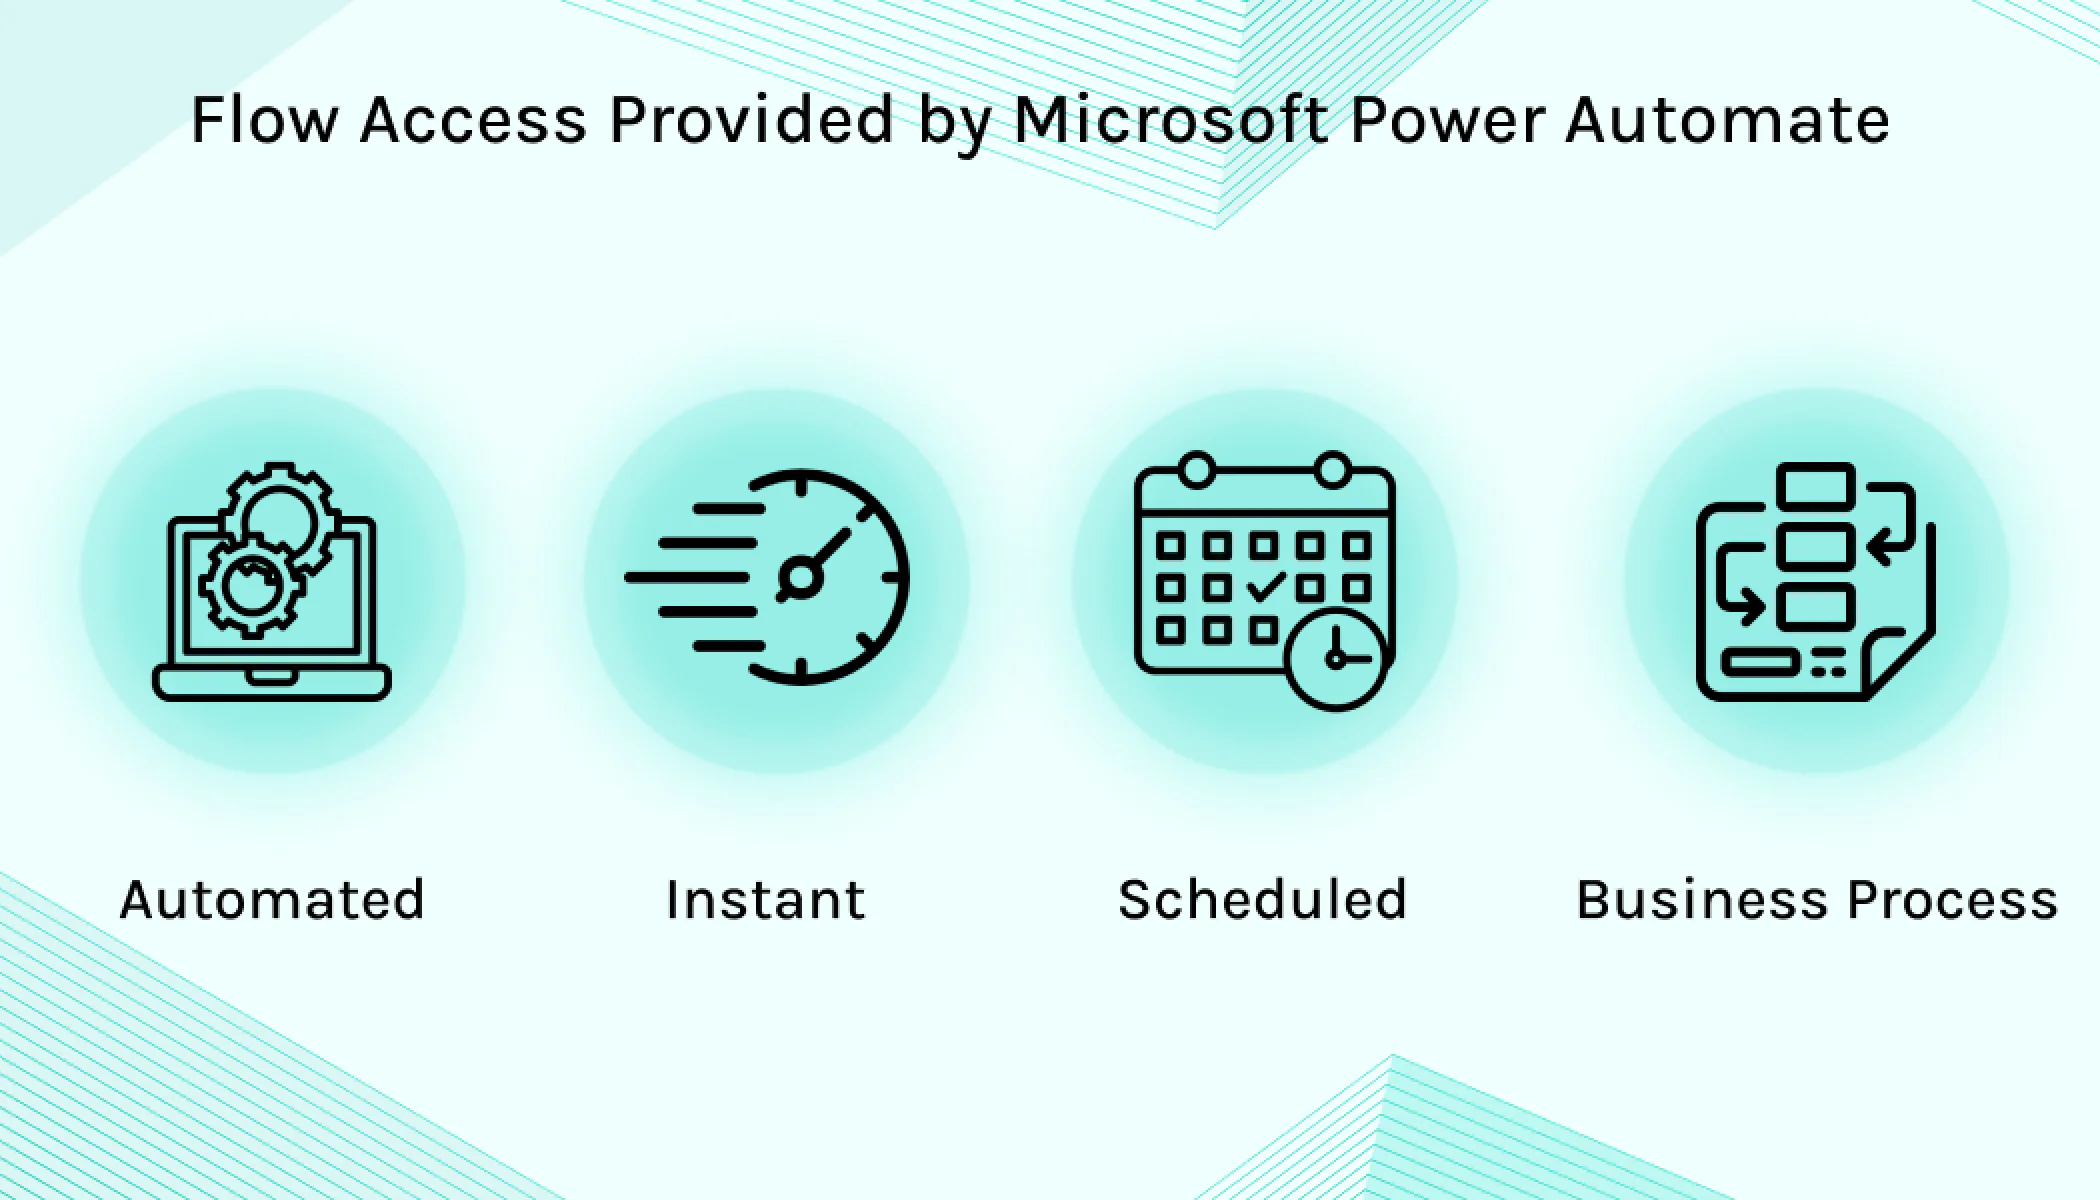 Flow access provided by microsoft by power automate